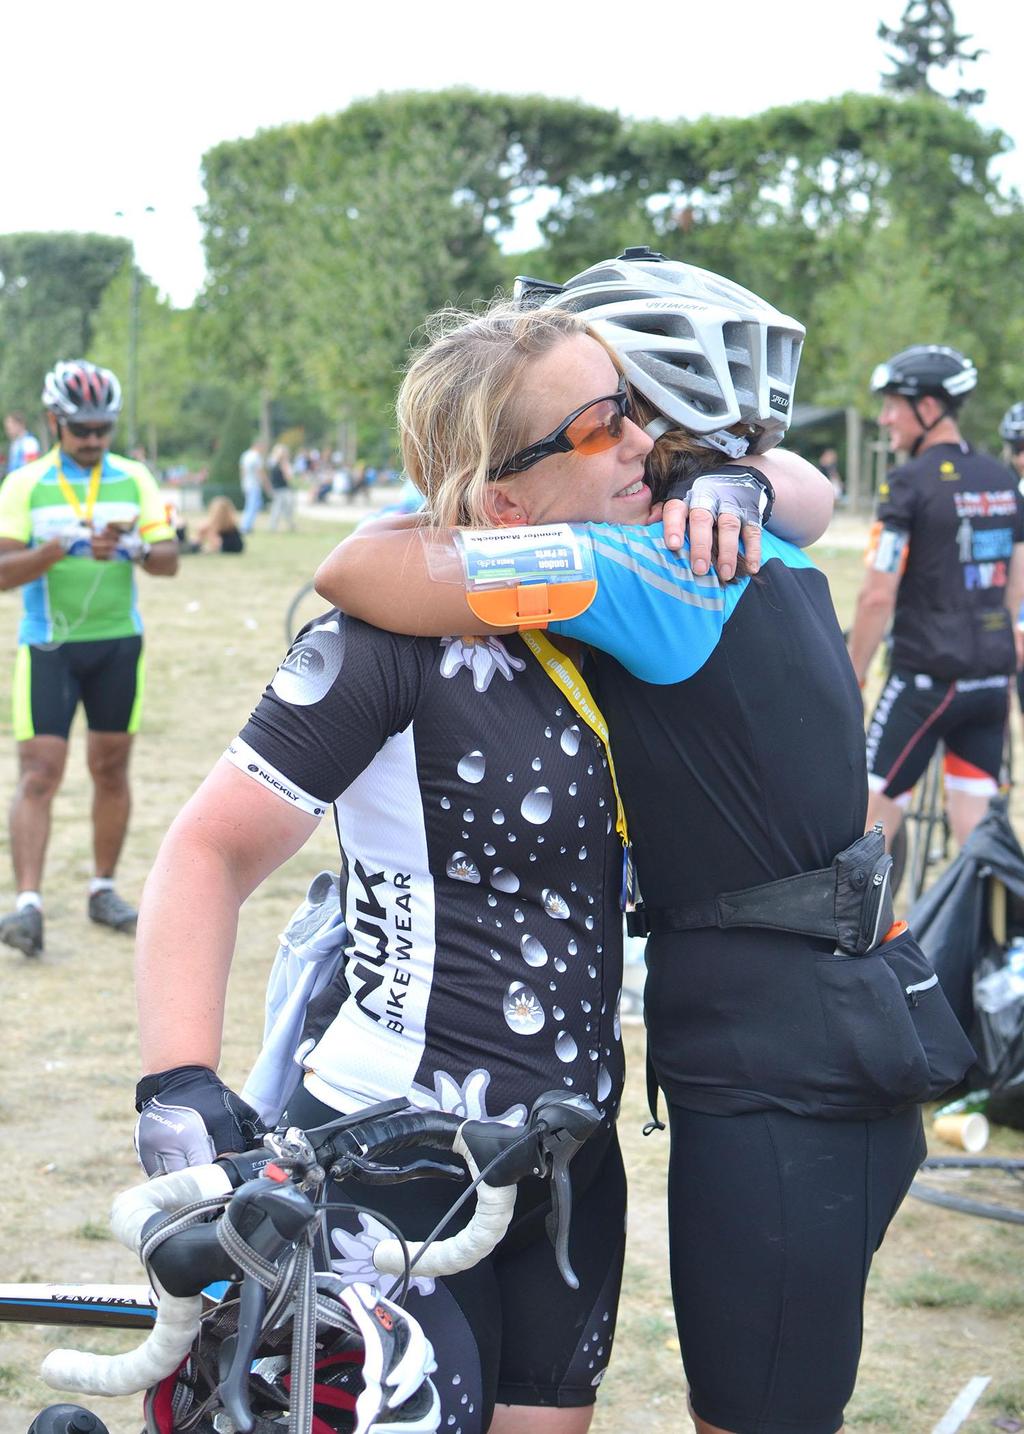 Cycle for us Prudential Ride London-Surrey 100 Sunday 30 July 2017 Ride 100 miles from London to Surrey Olympic legacy event Follow in the cycle tracks of the London 2012